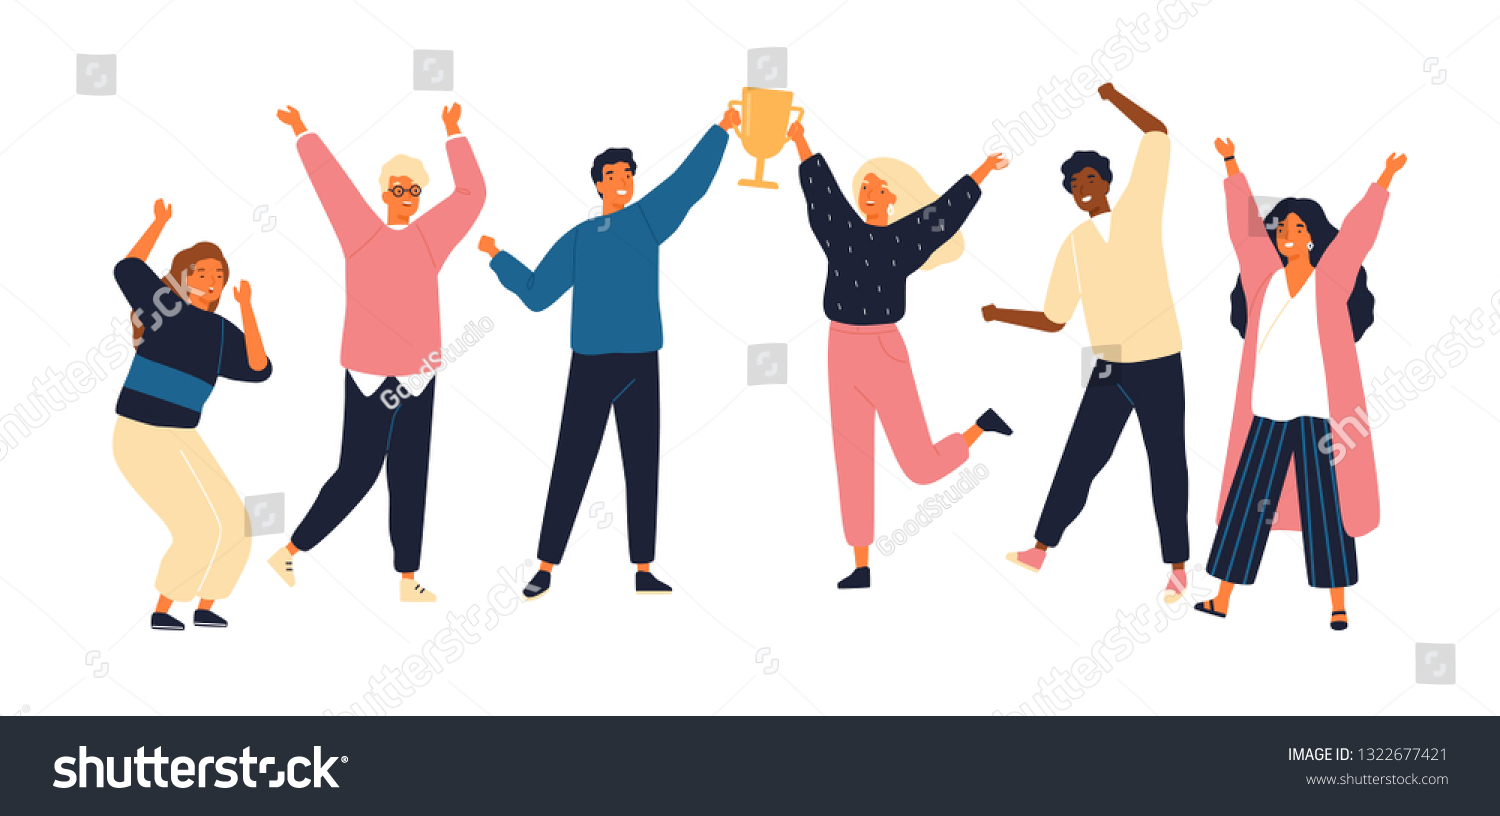 Group of young joyful people with champion cup isolated on white background. Happy positive men and women celebrating victory and rejoicing together. Successful teamwork. Flat vector illustration. #1322677421